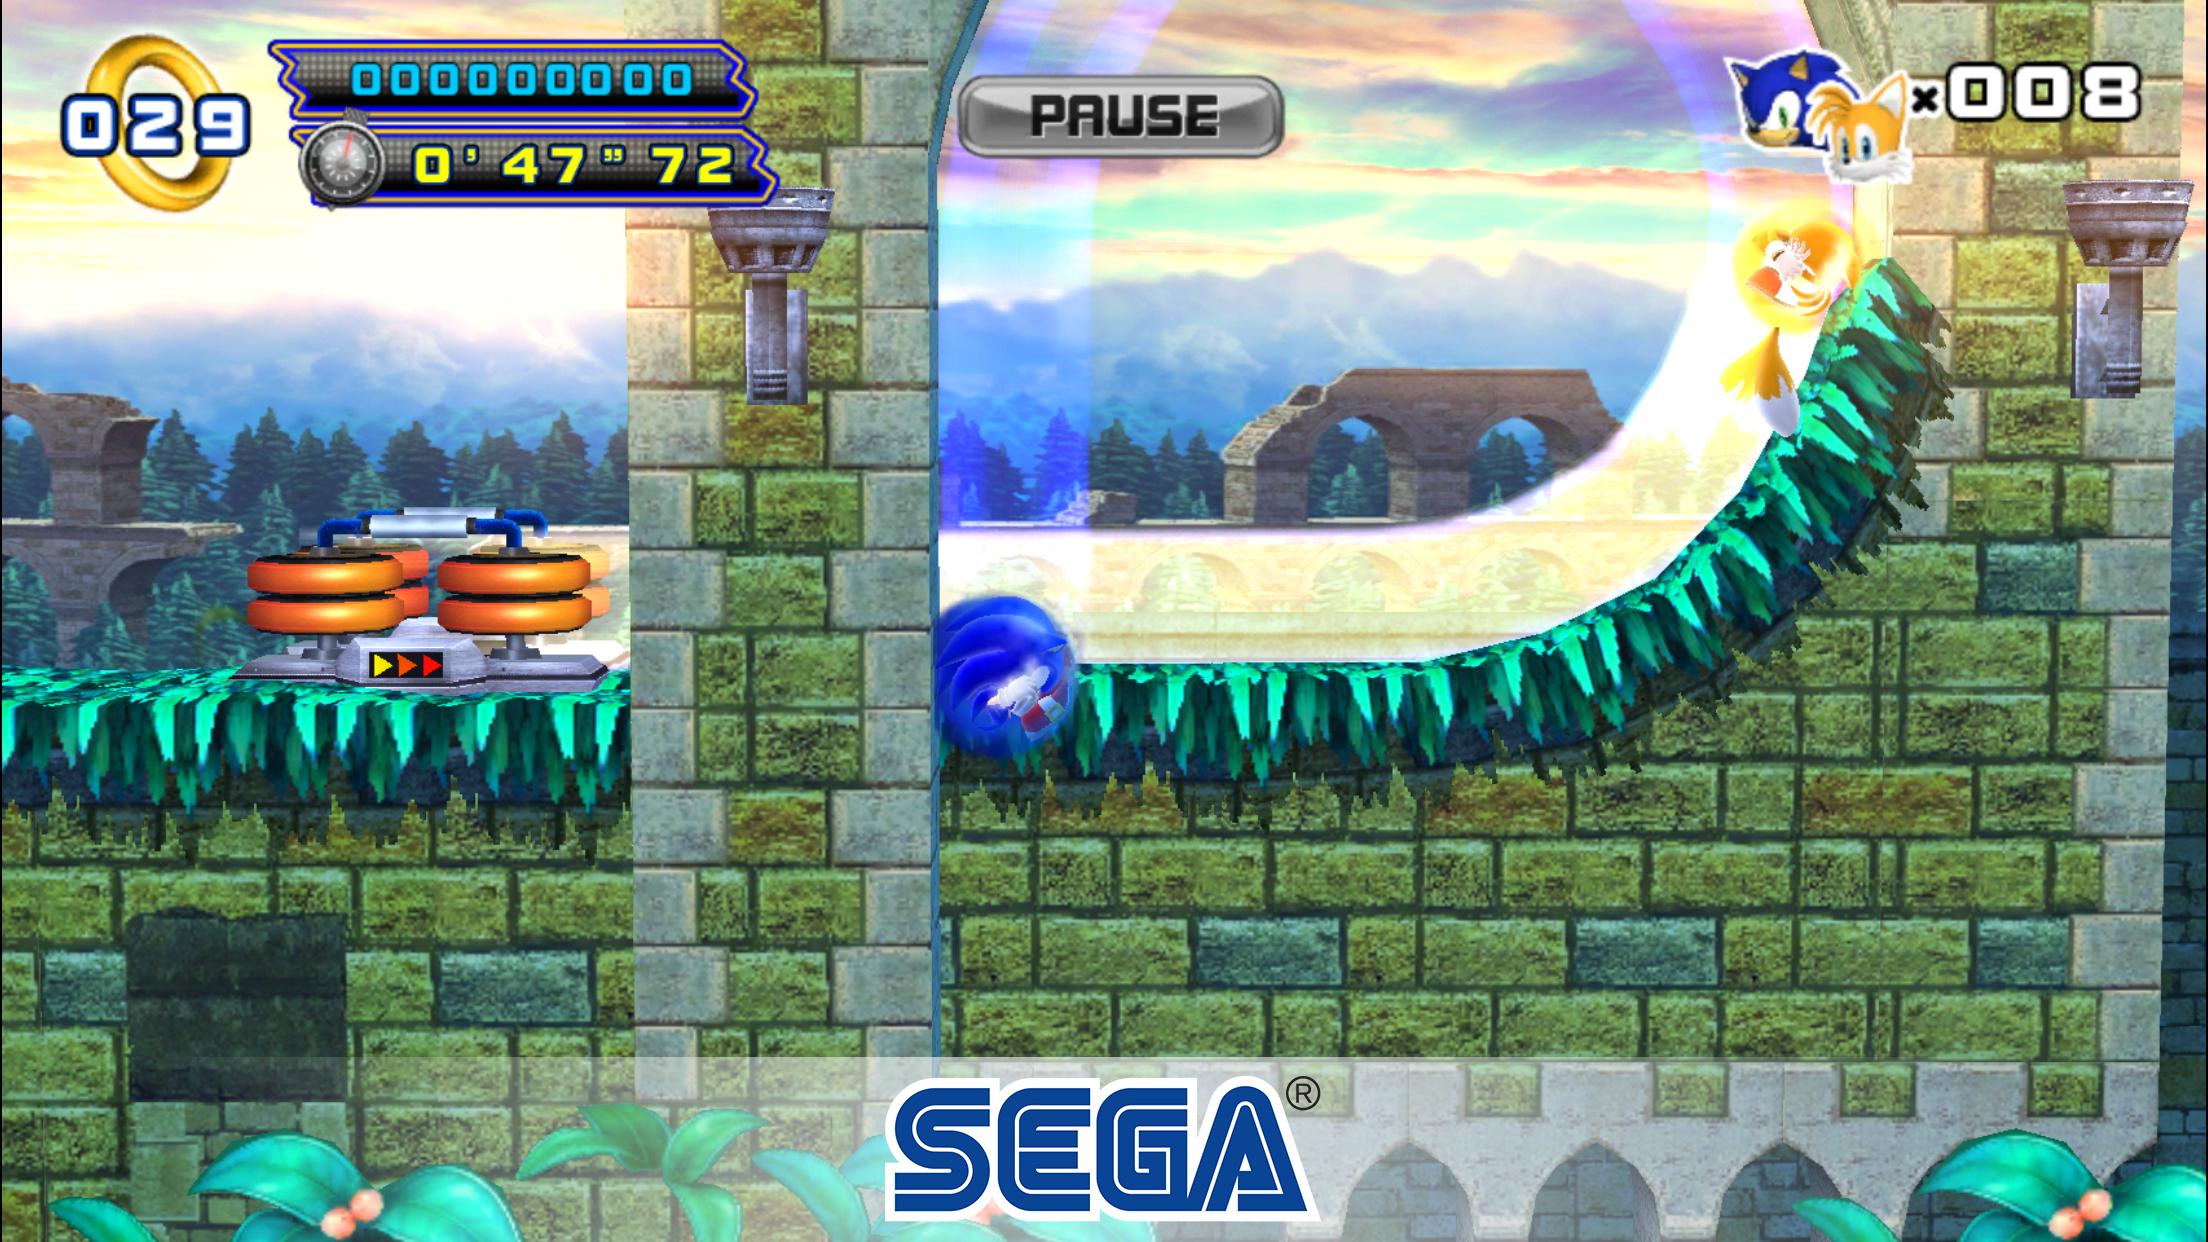 Sonic The Hedgehog 2 APK (Android Game) - Free Download